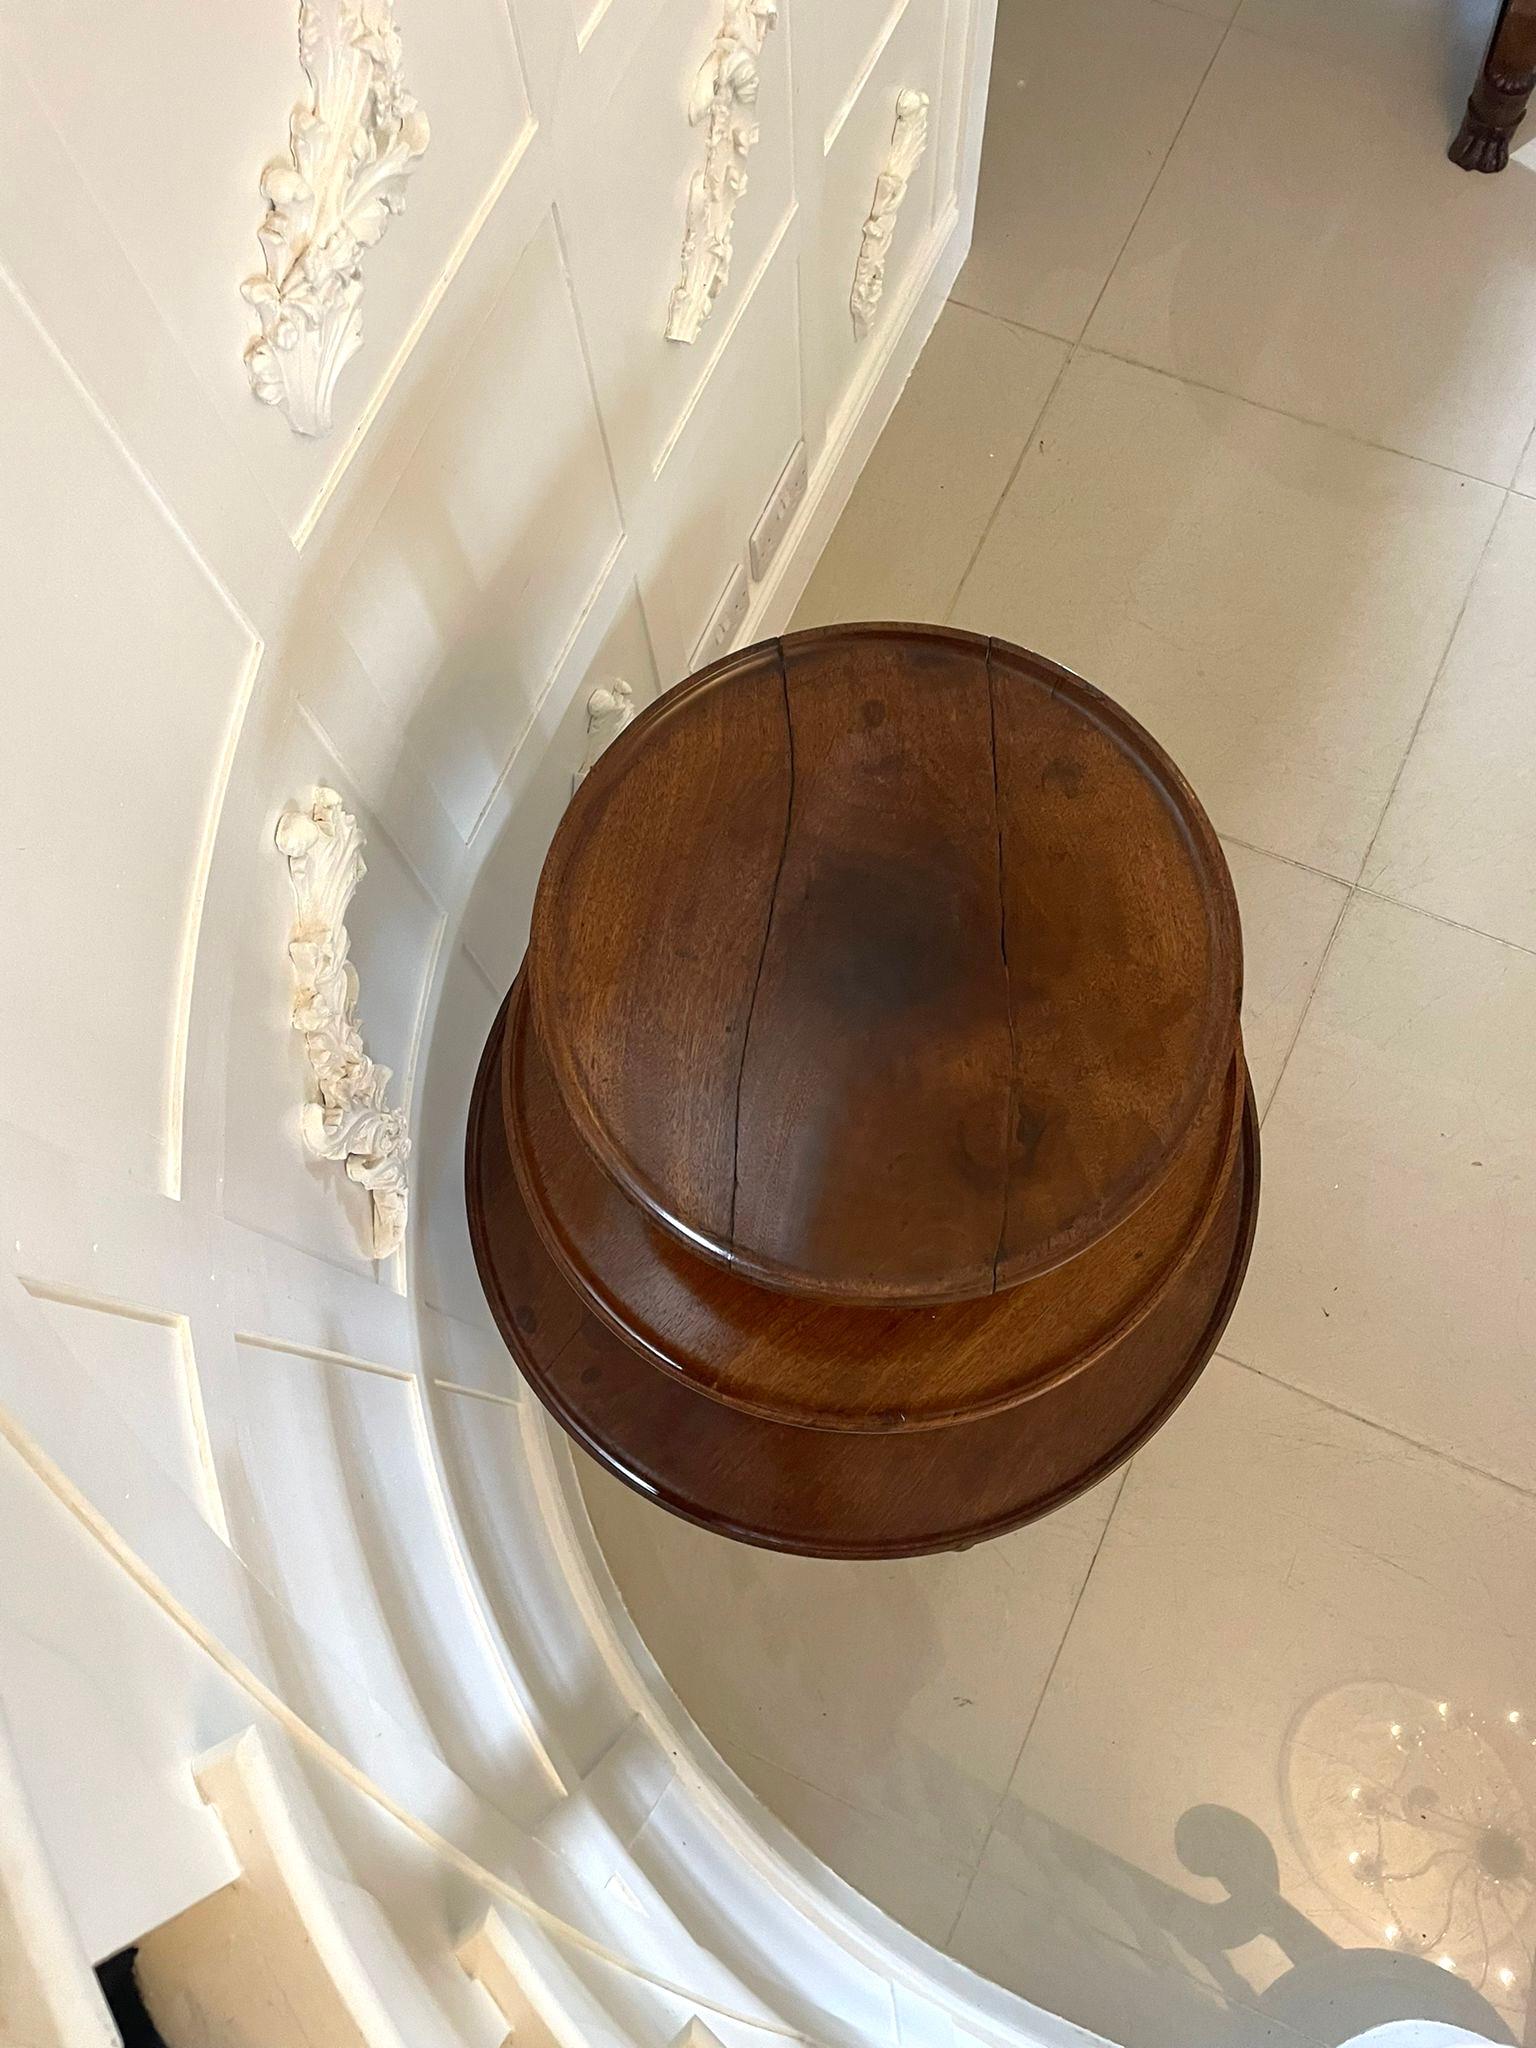 Antique George III quality mahogany 3 tier circular dumb waiter having 3 circular quality mahogany display tiers supported by turned columns standing on 3 shaped cabriole legs with pad feet original brass castors


Dimensions:
Height 108 cm (42.52